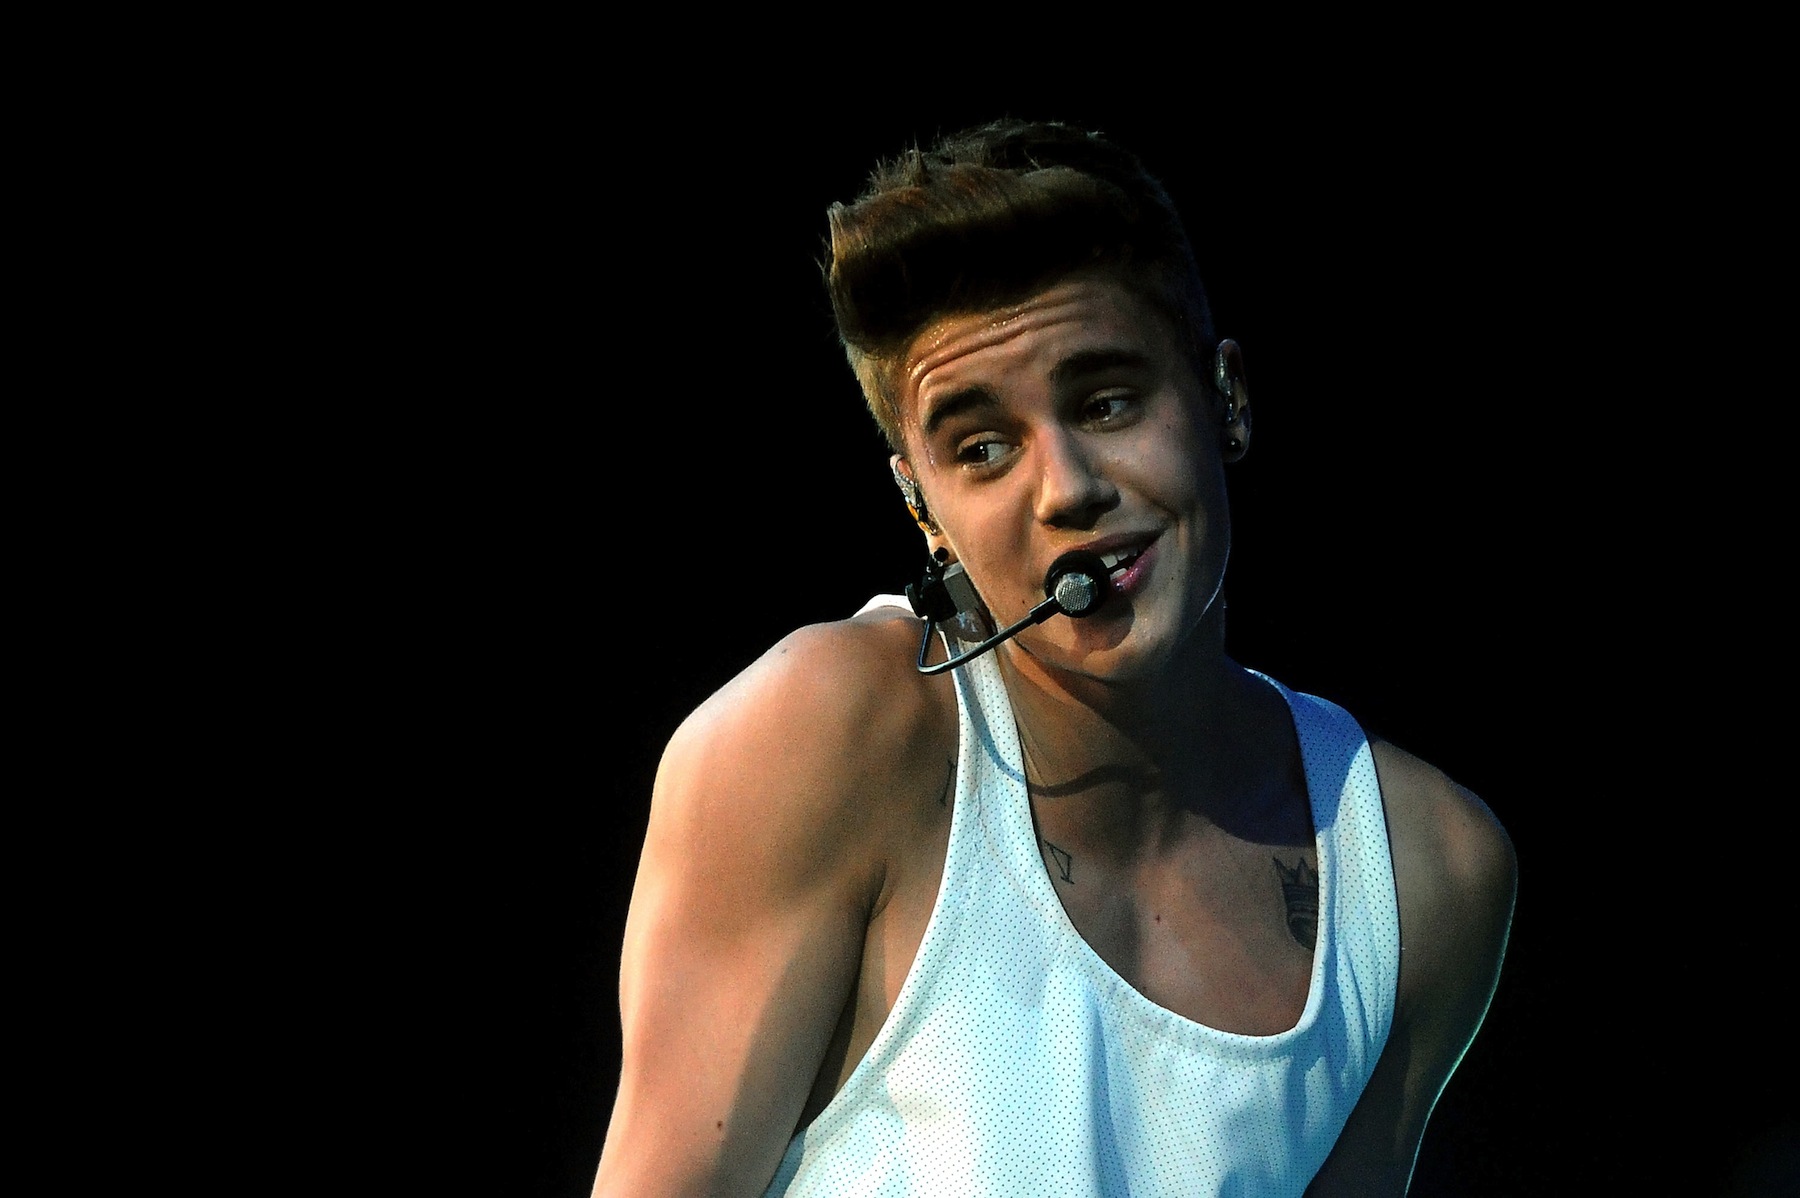 Justin Bieber performs on March 23, 2013, in Bologna, Italy (Roberto Serra / Iguana Press / Redferns via Getty Images)